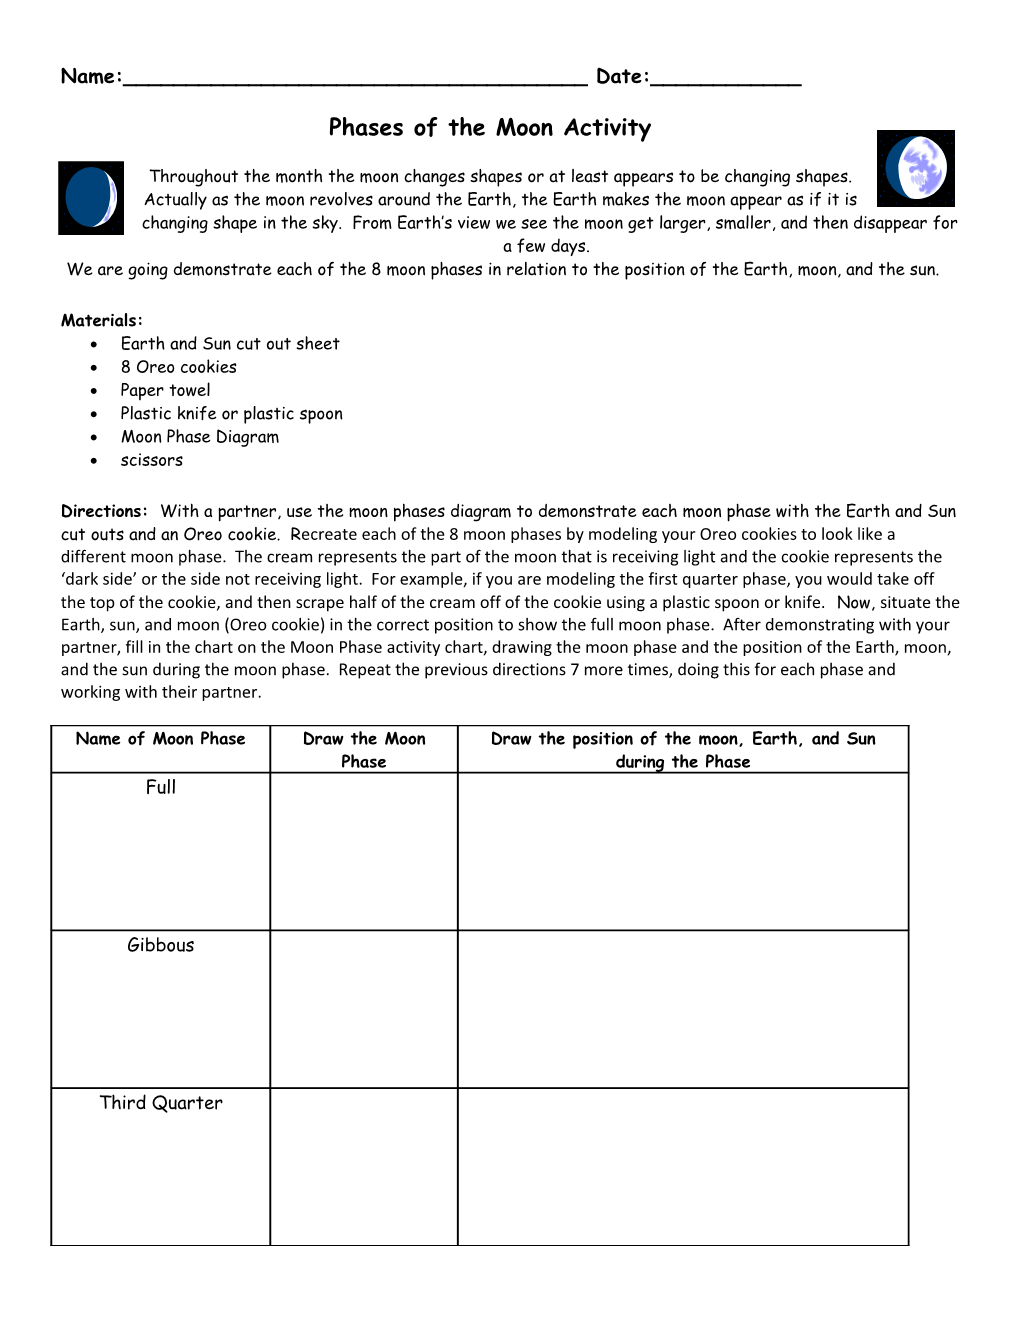 Phases of the Moon Activity